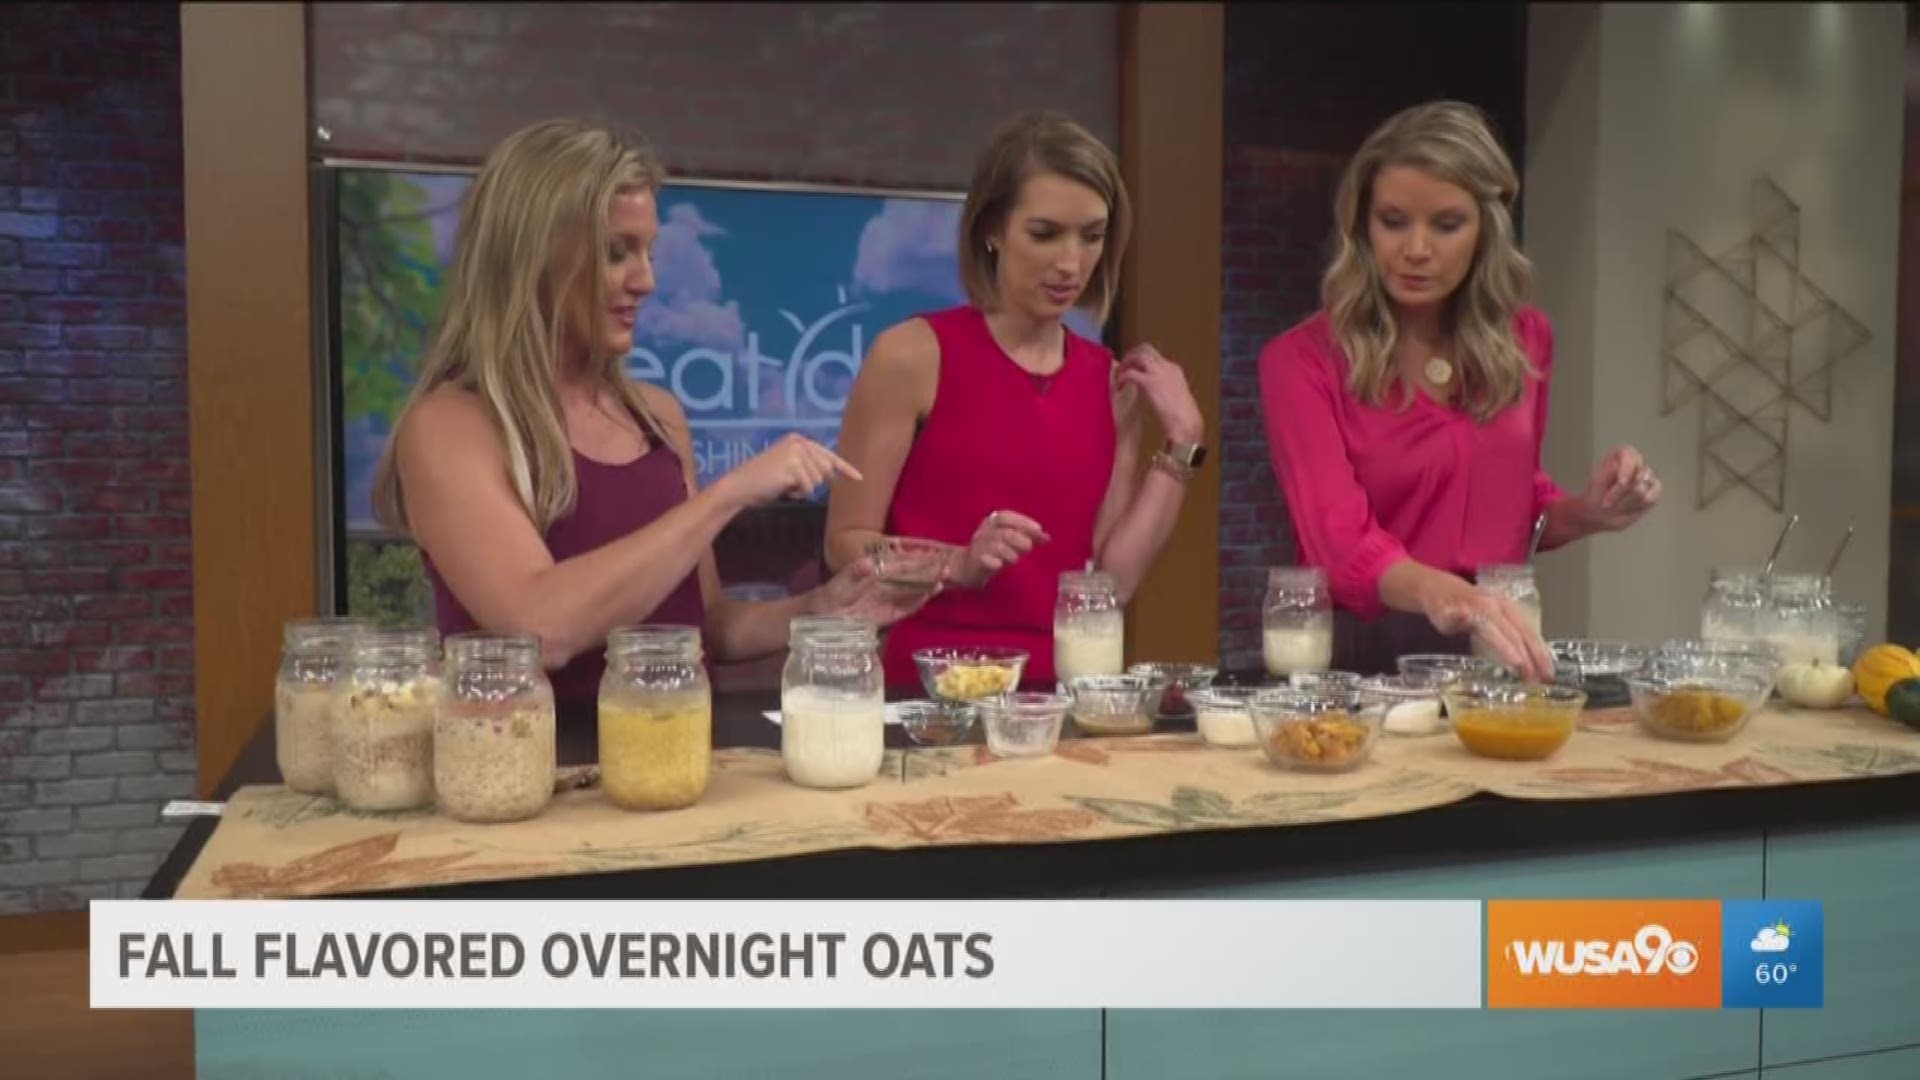 Fitness and nutrition expert Corey Phelps shows us overnight oat recipes that feature fall flavors.